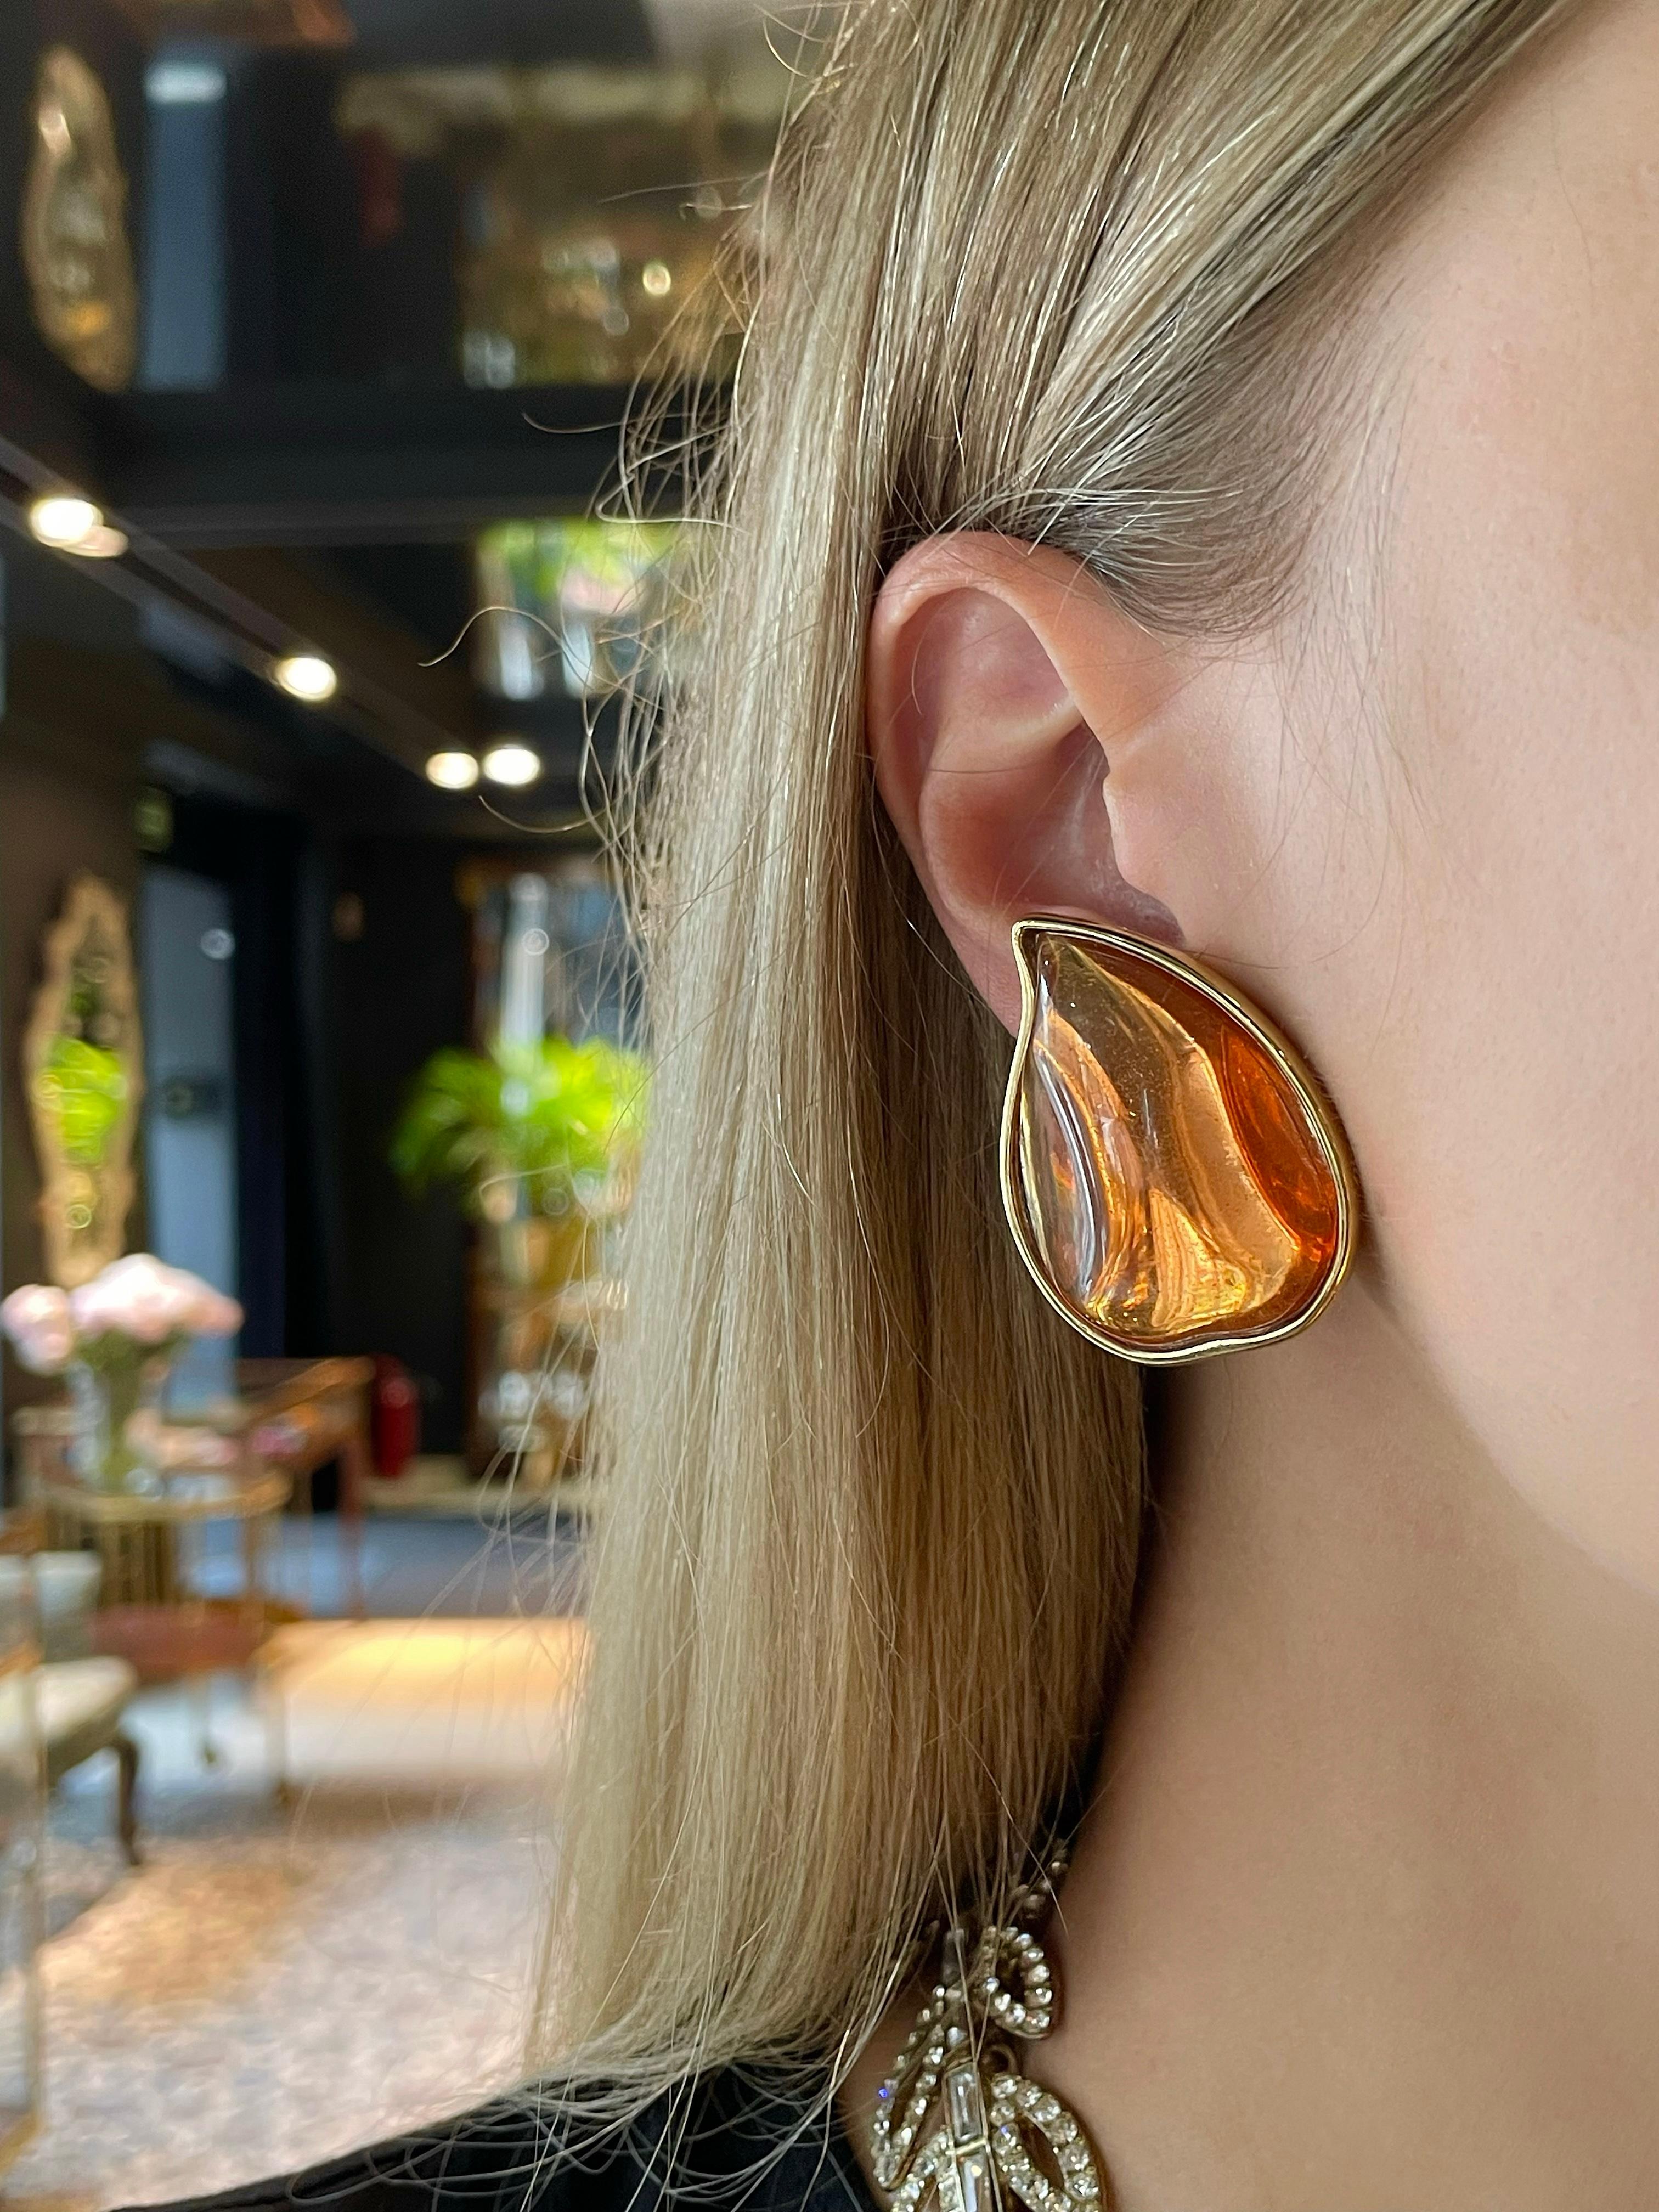 This is a playful pair of clip on earrings designed by YSL in 1980��’s. The piece is gold plated and features orange resin. 

Signed: “YSL - Made in France” (shown in photos). 

Size: 4x3cm

———

If you have any questions, please feel free to ask. We